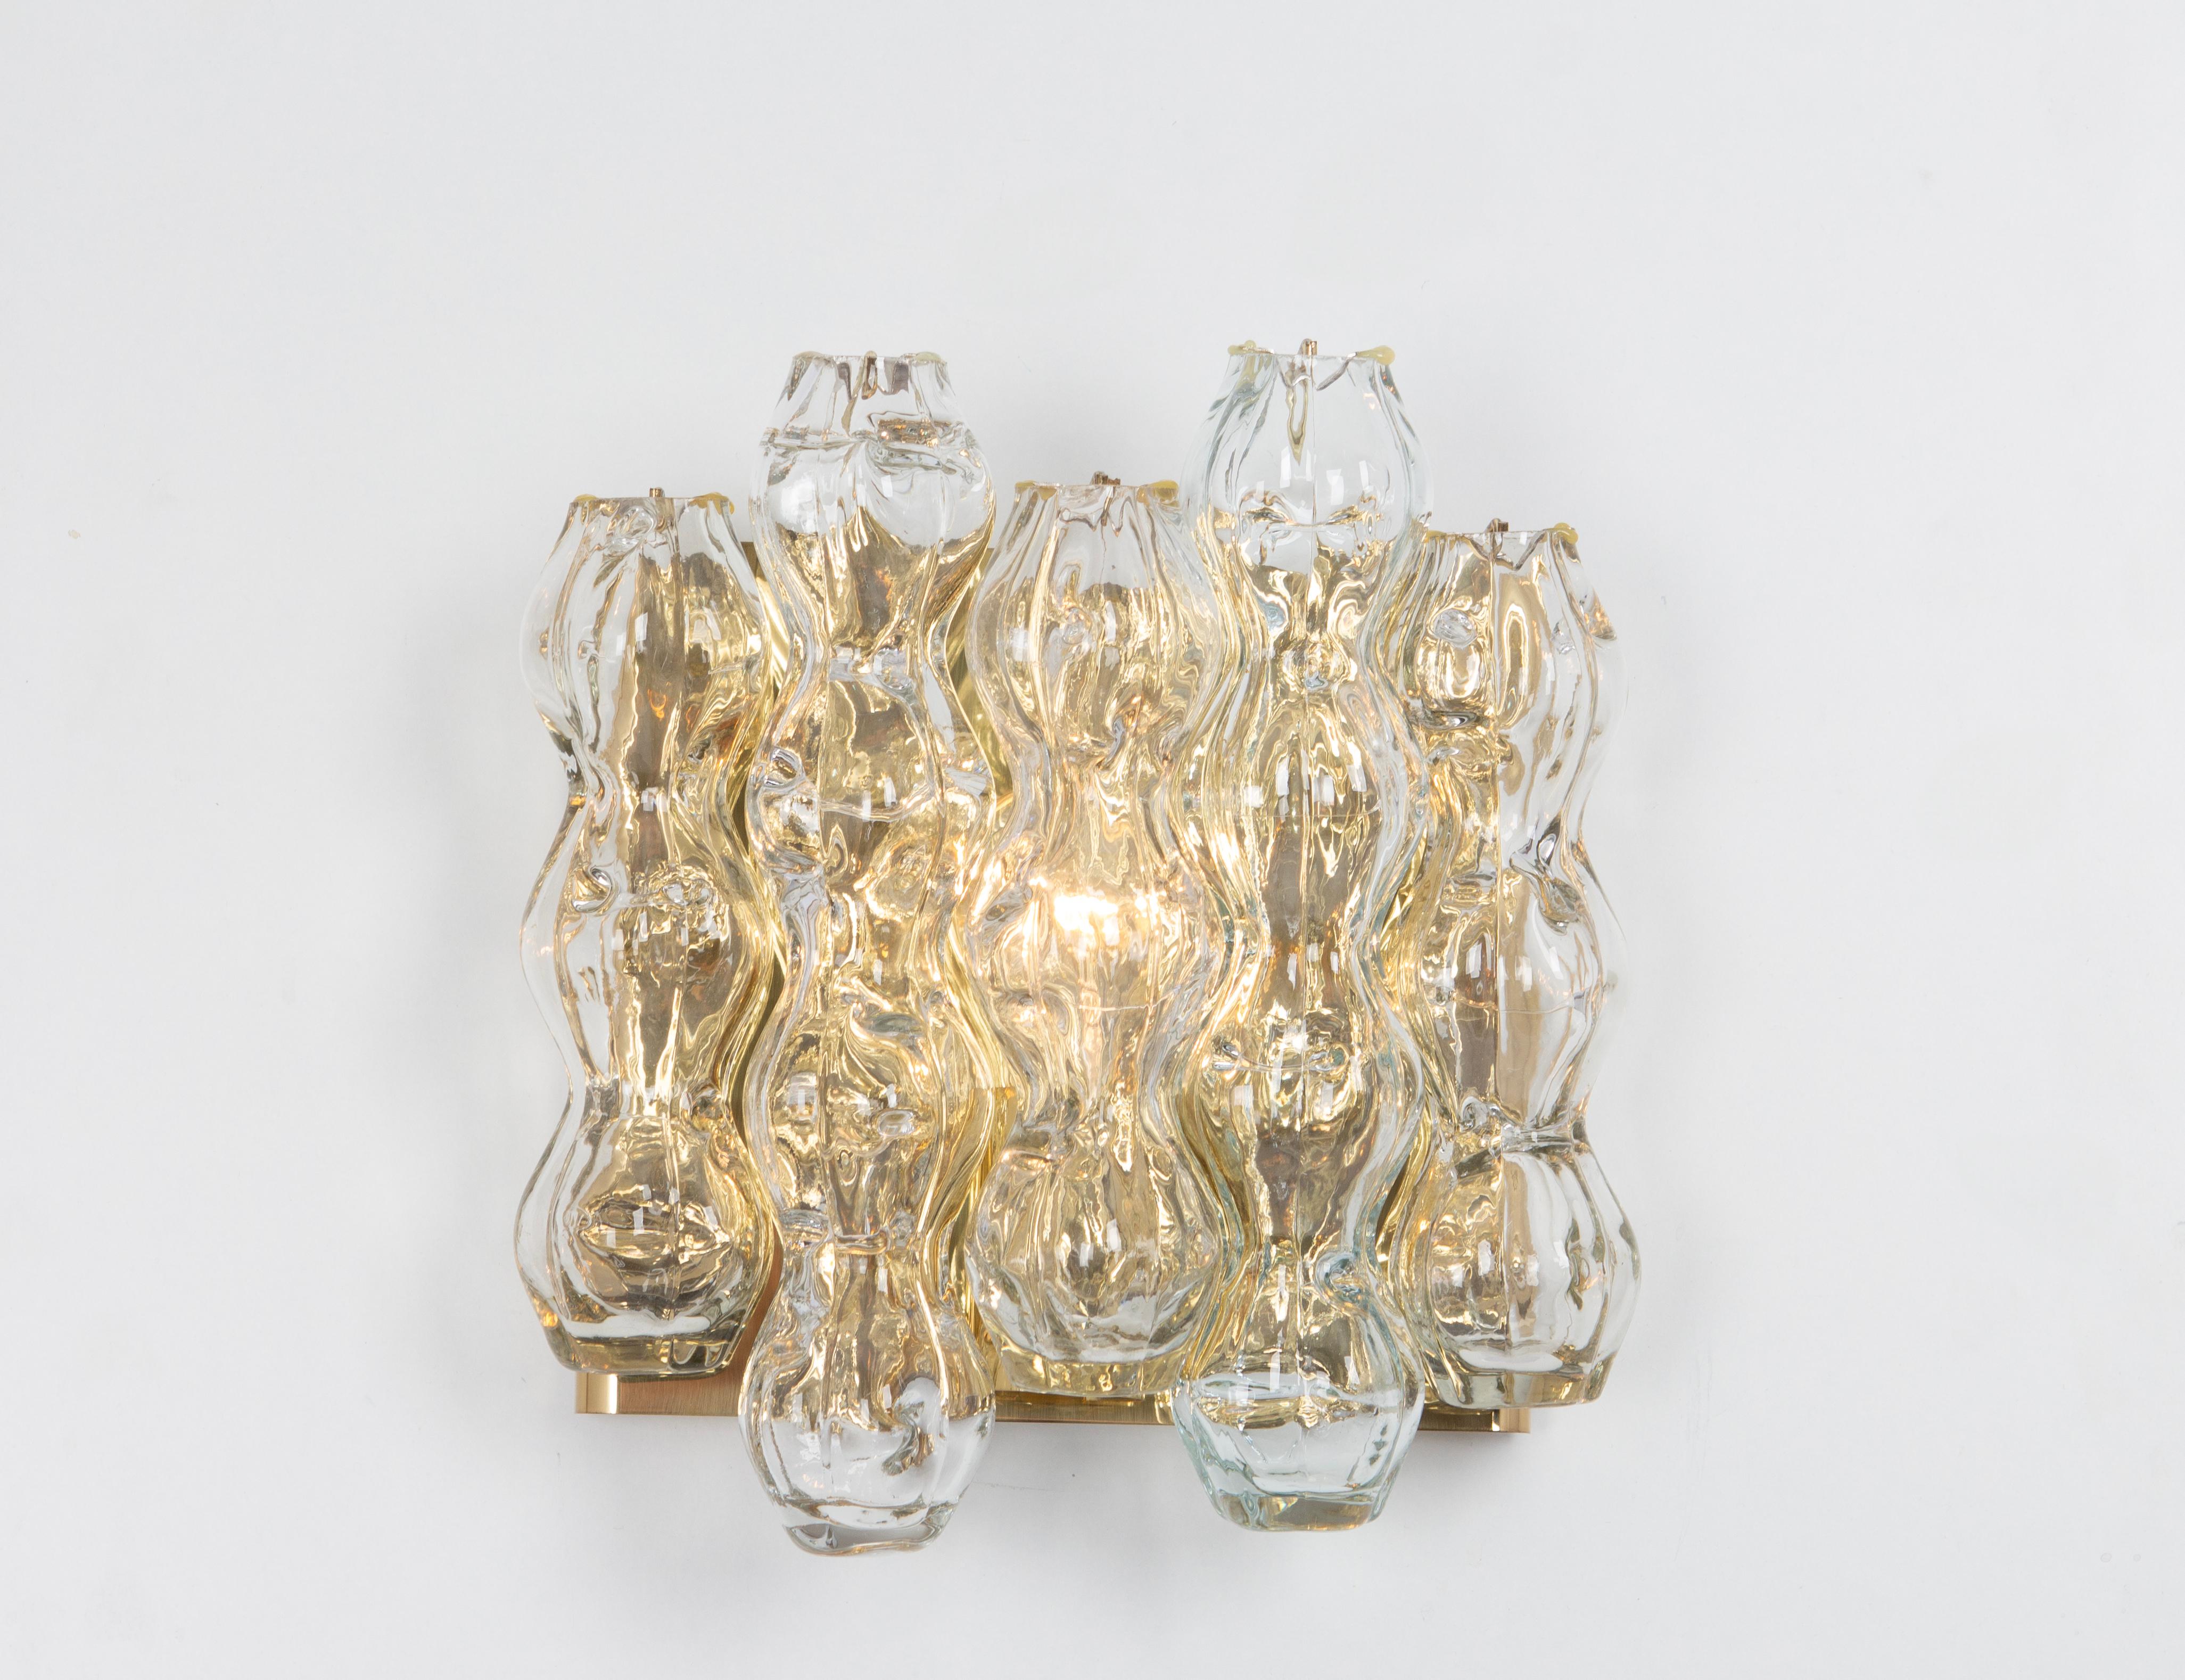 Pair of Large Murano Glass Wall Sconces by Doria, Germany, 1960s For Sale 3